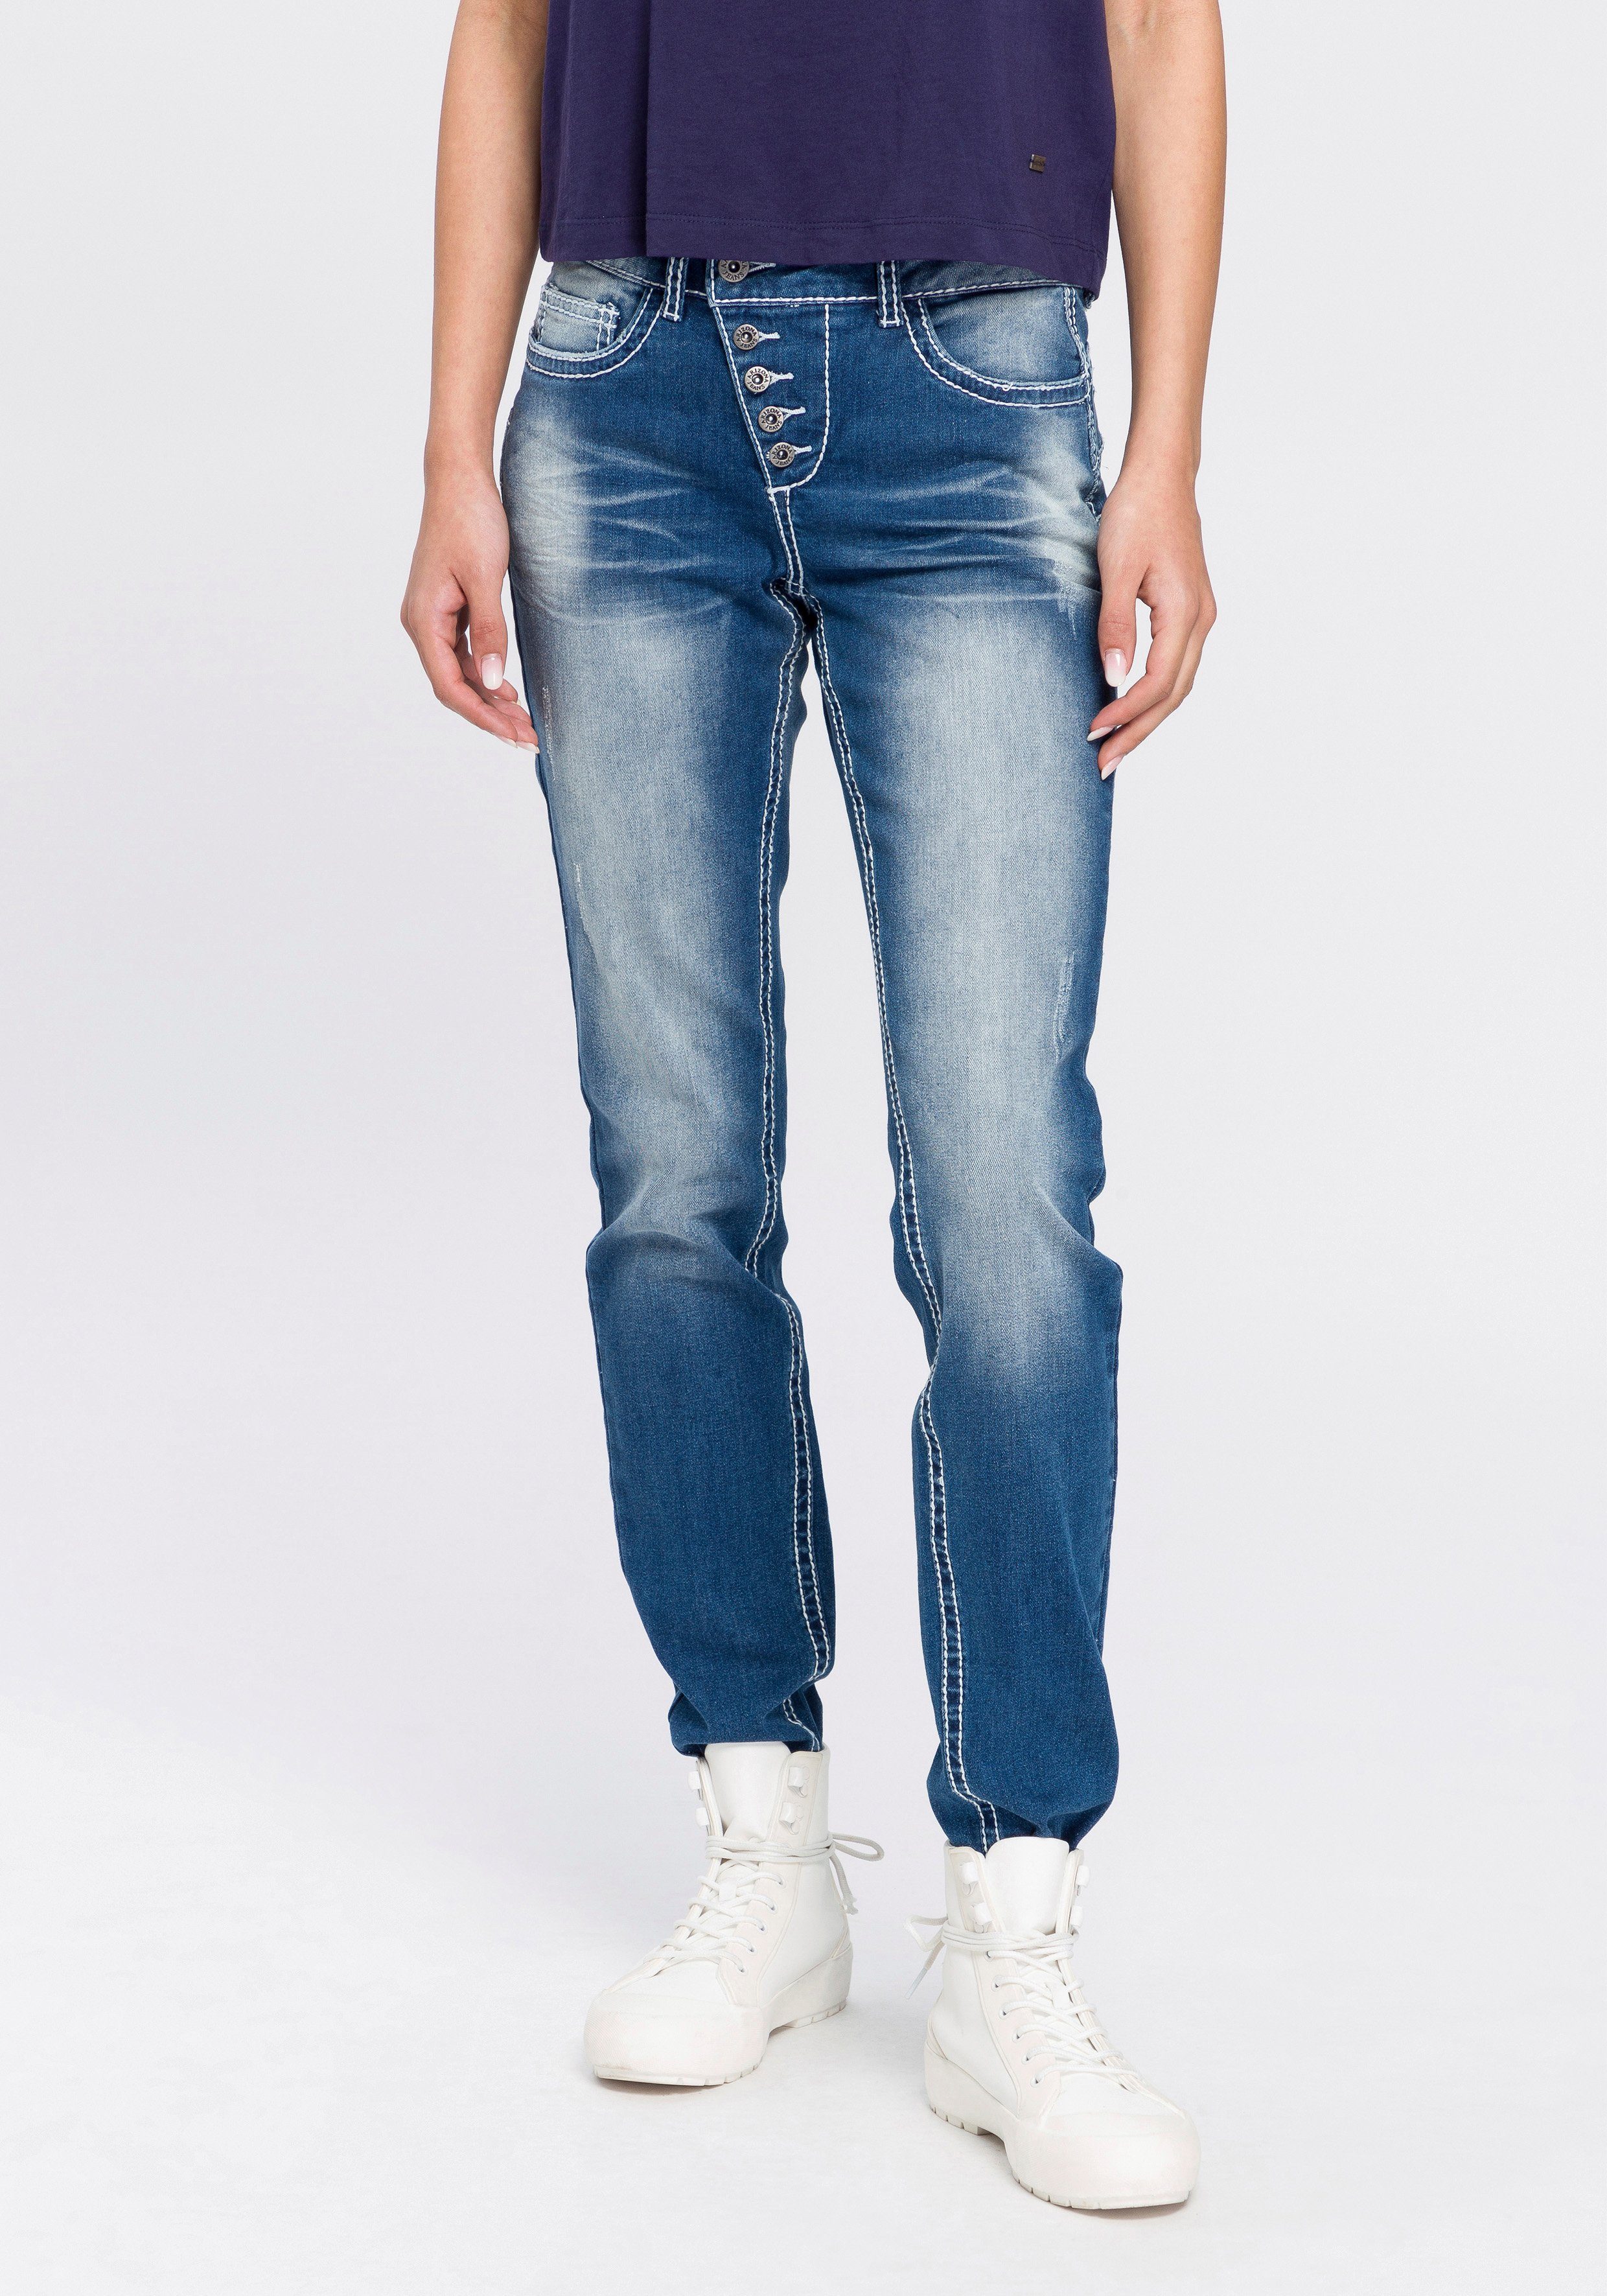 kopen waist Heavy fit Shaping | Slim Mid Washed jeans online - Arizona OTTO